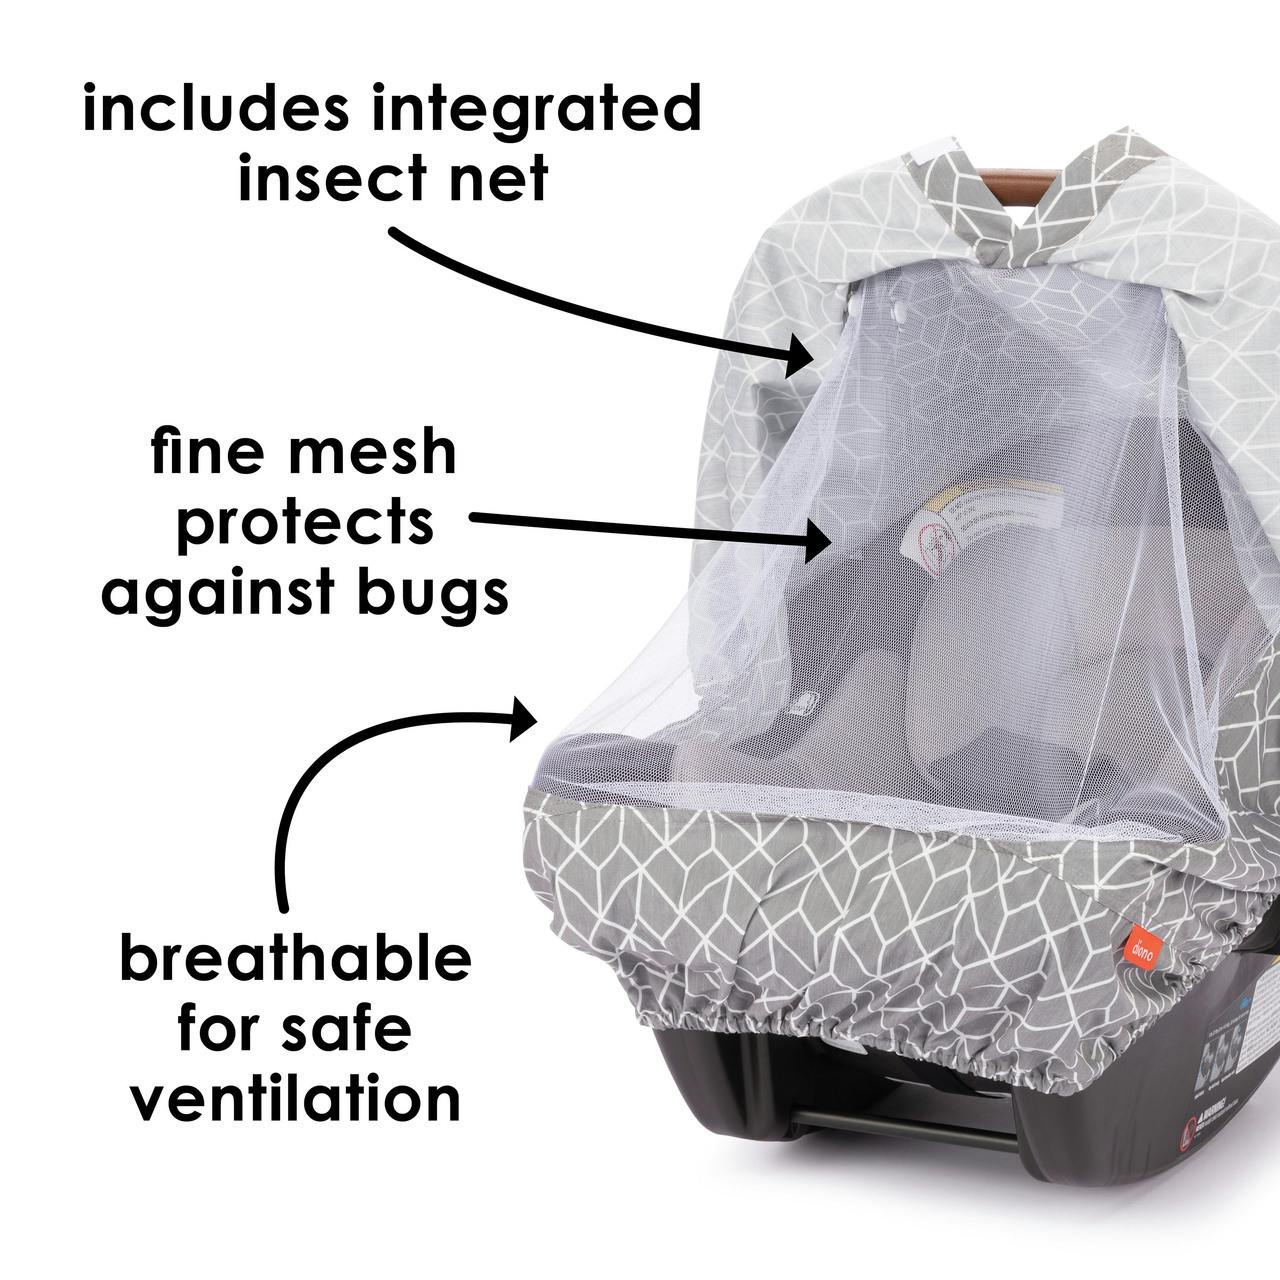 Diono Infant Car Seat Cover · Gray